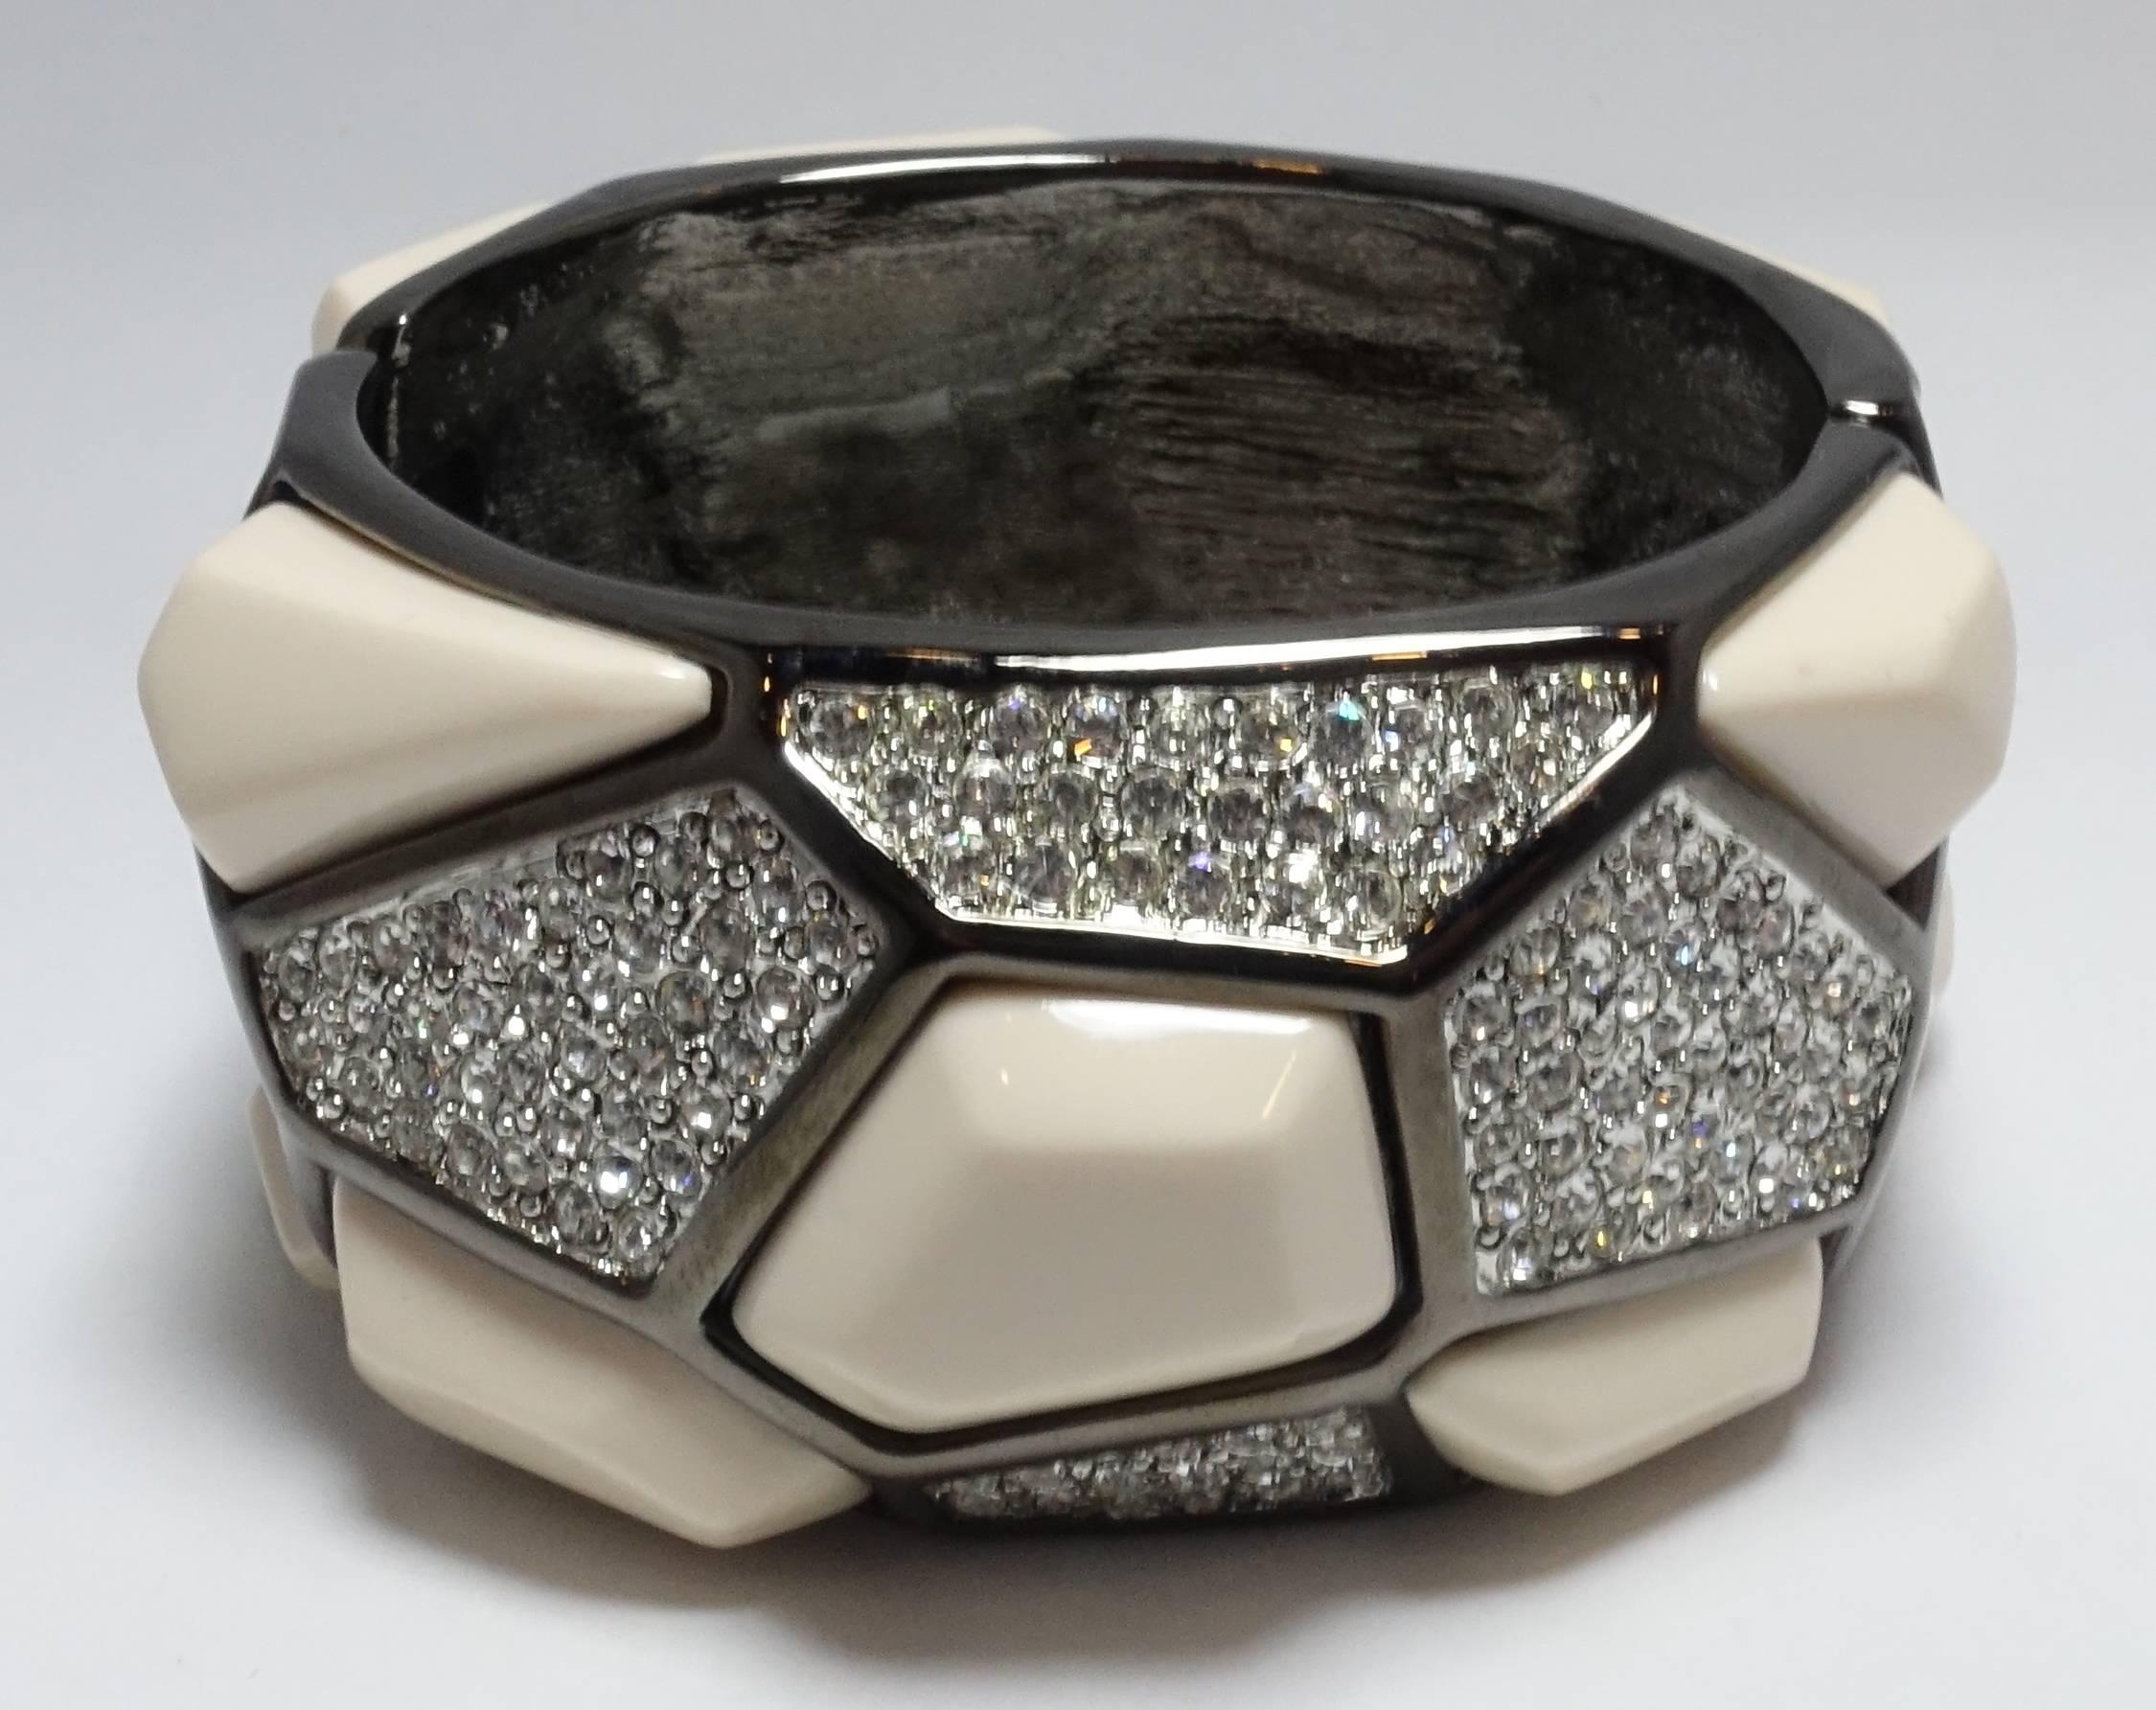 This signed Kenneth Lane clamper bangle bracelet features amorphic shape panels of ivory color stones and clear rhinestone accents in a gun metal setting.  It measures 7” x 1-3/4” and is signed “Kenneth Lane”.  It is in excellent condition and